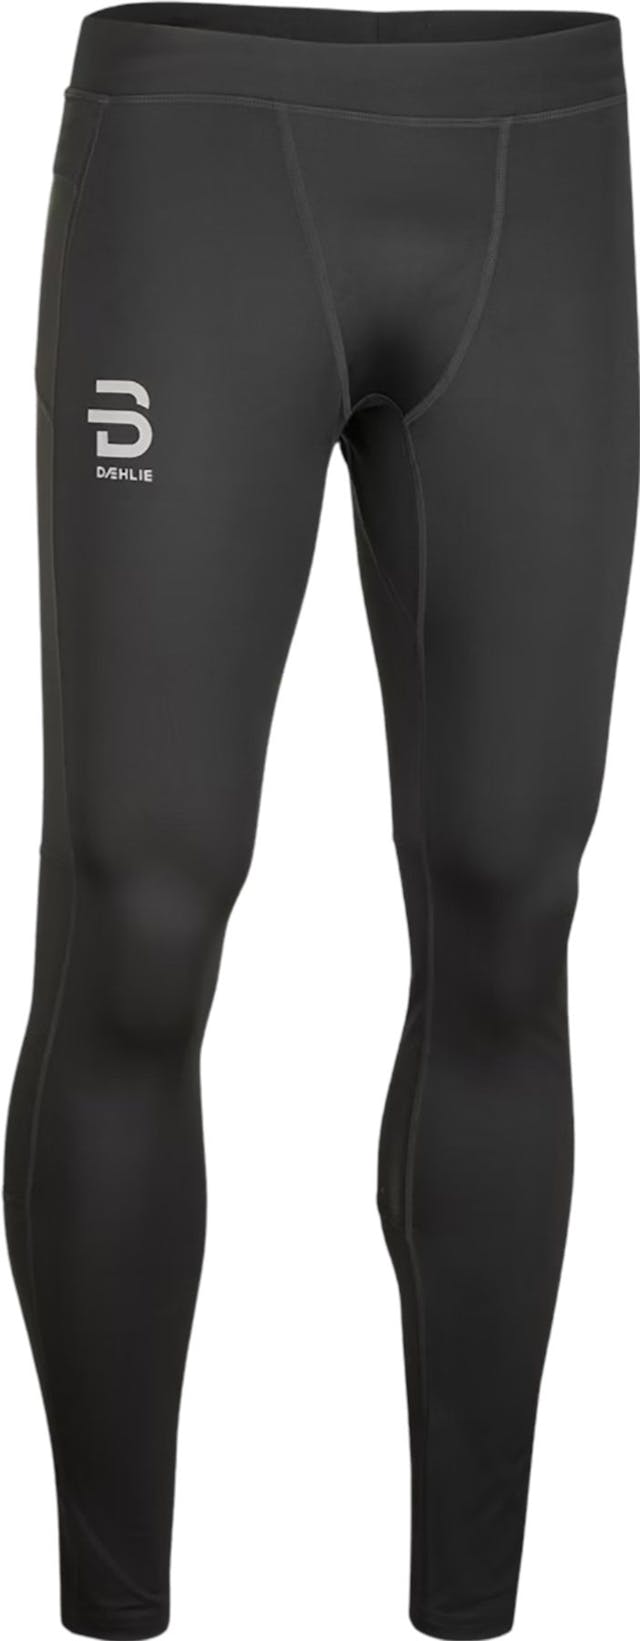 Product image for Direction Tights - Men's